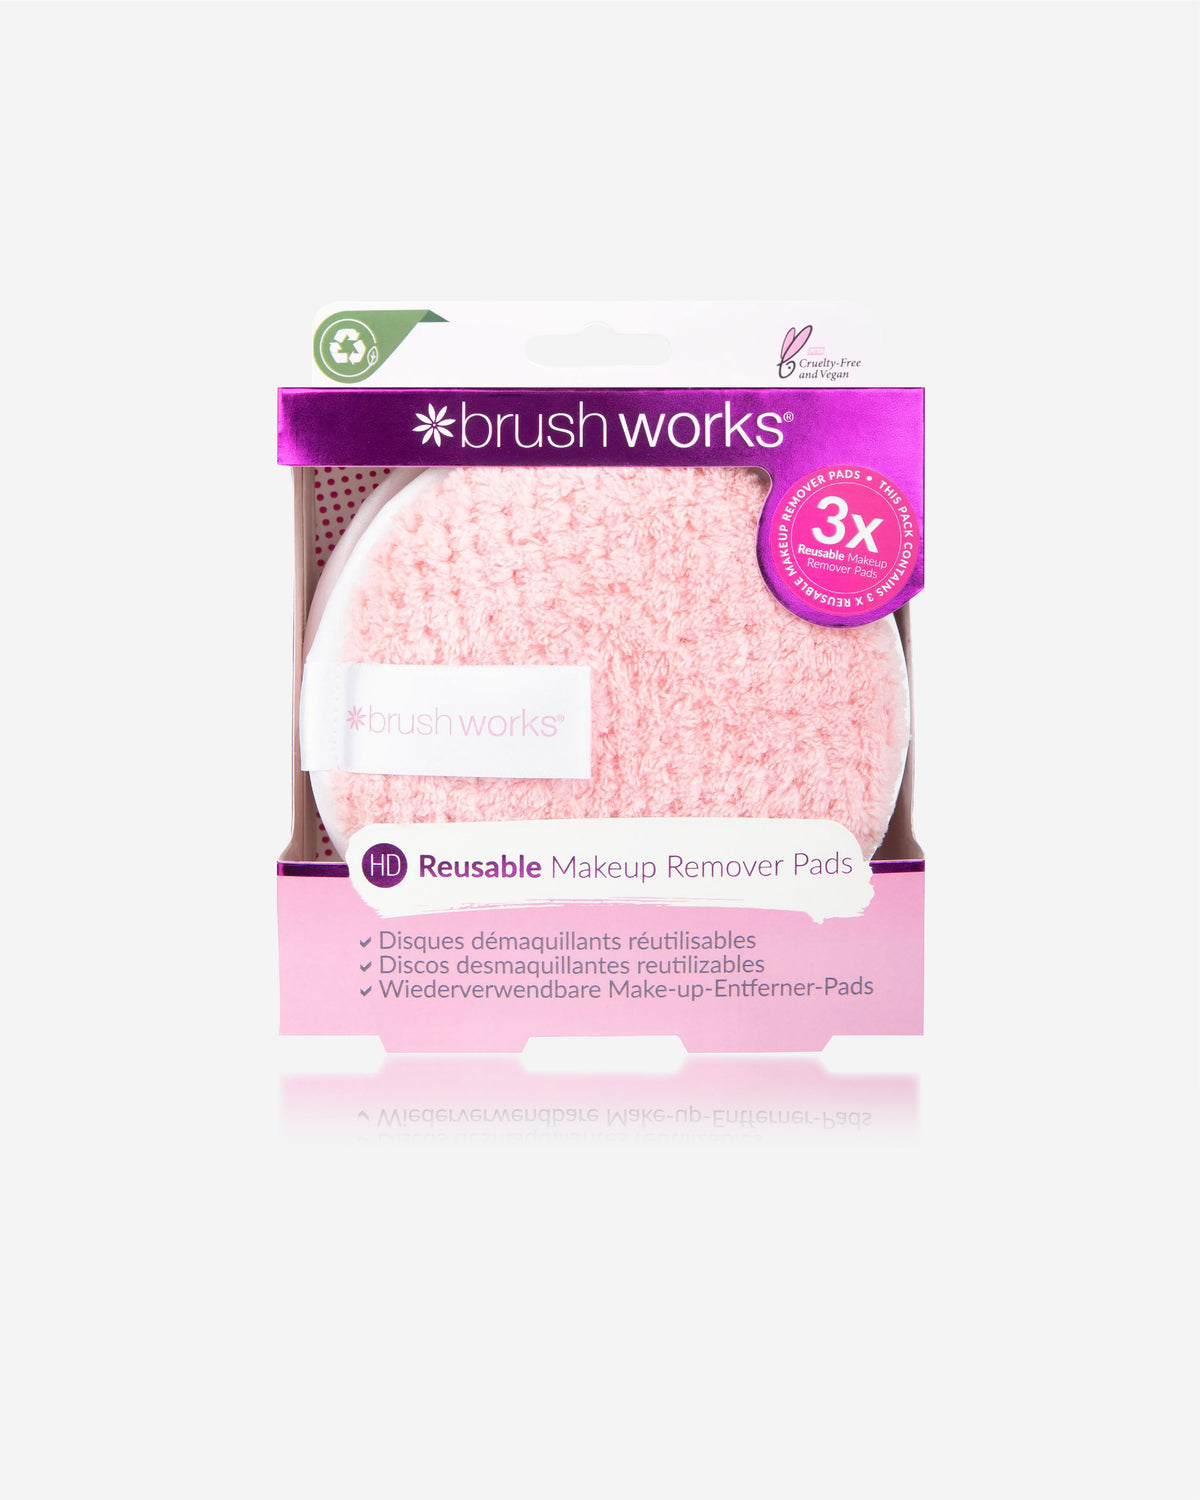 Brushworks Hd Reusable Makeup Remover Pads (Pack Of 3)